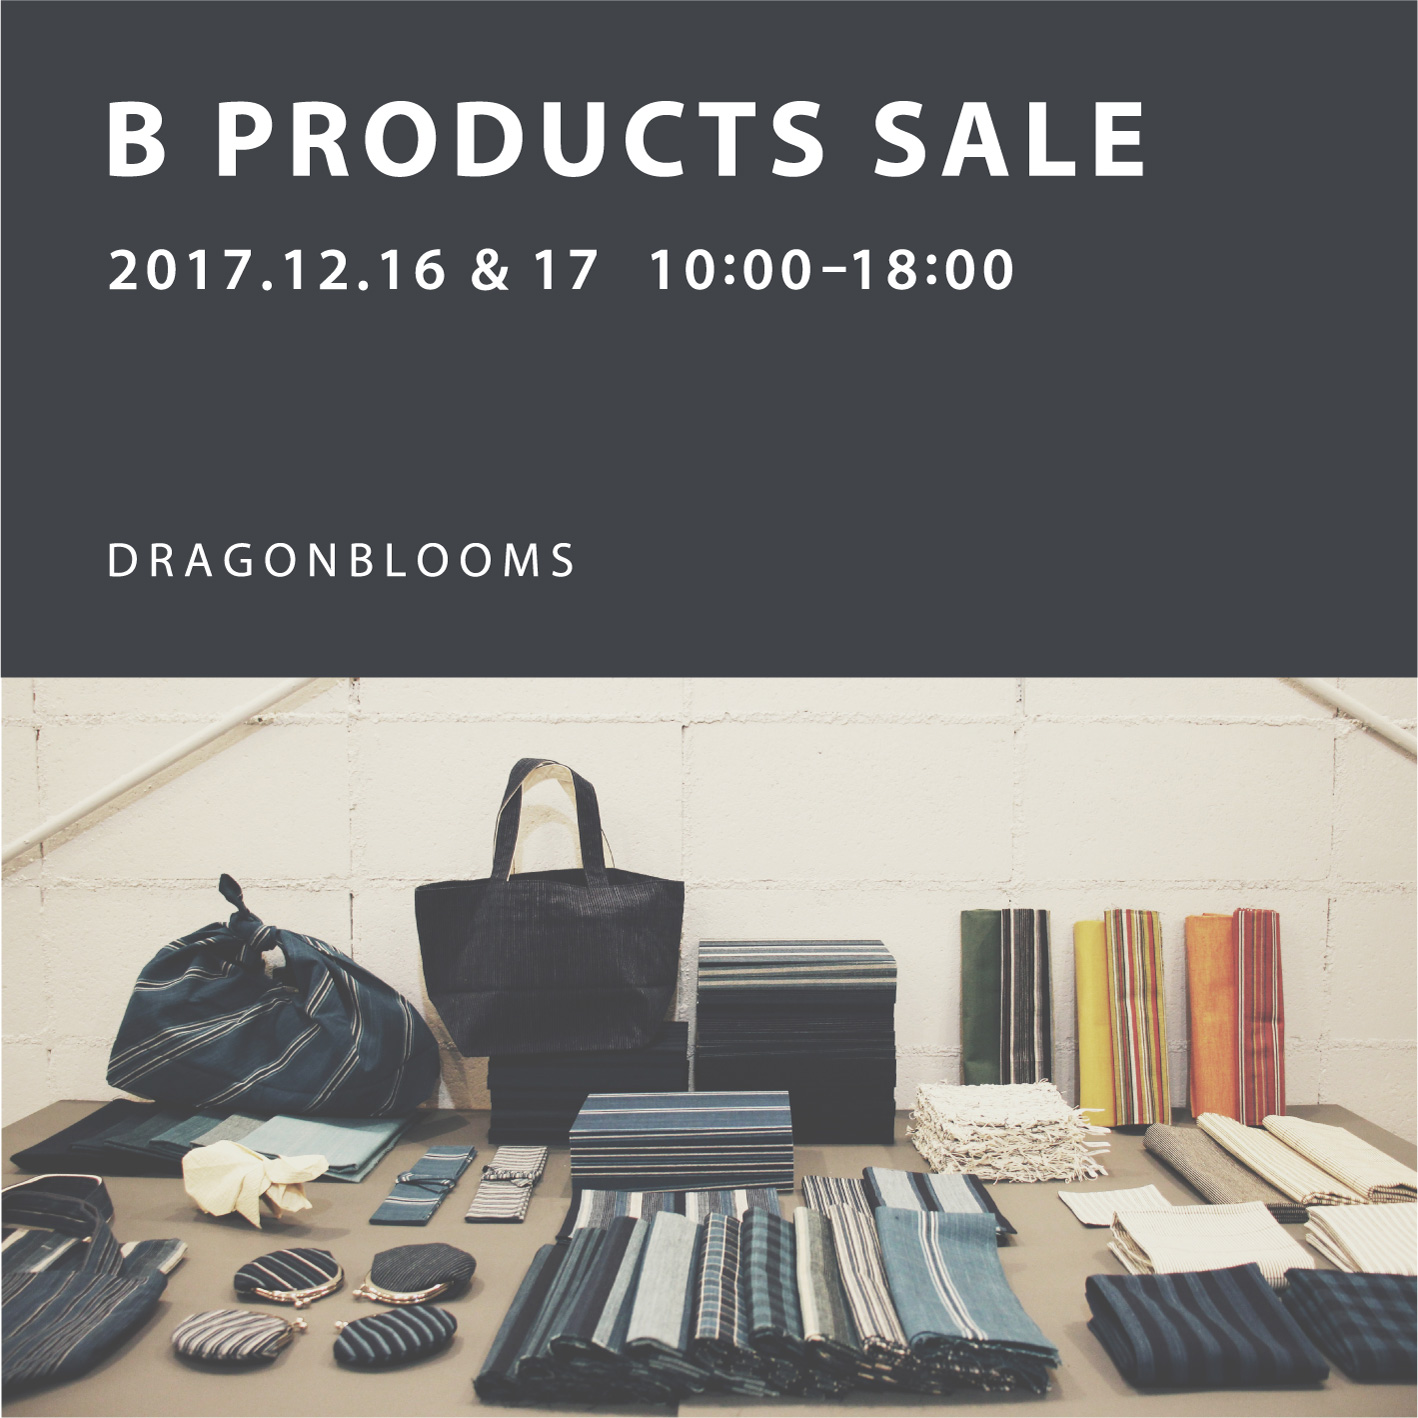 B PRODUCTS SALE 開催のご案内